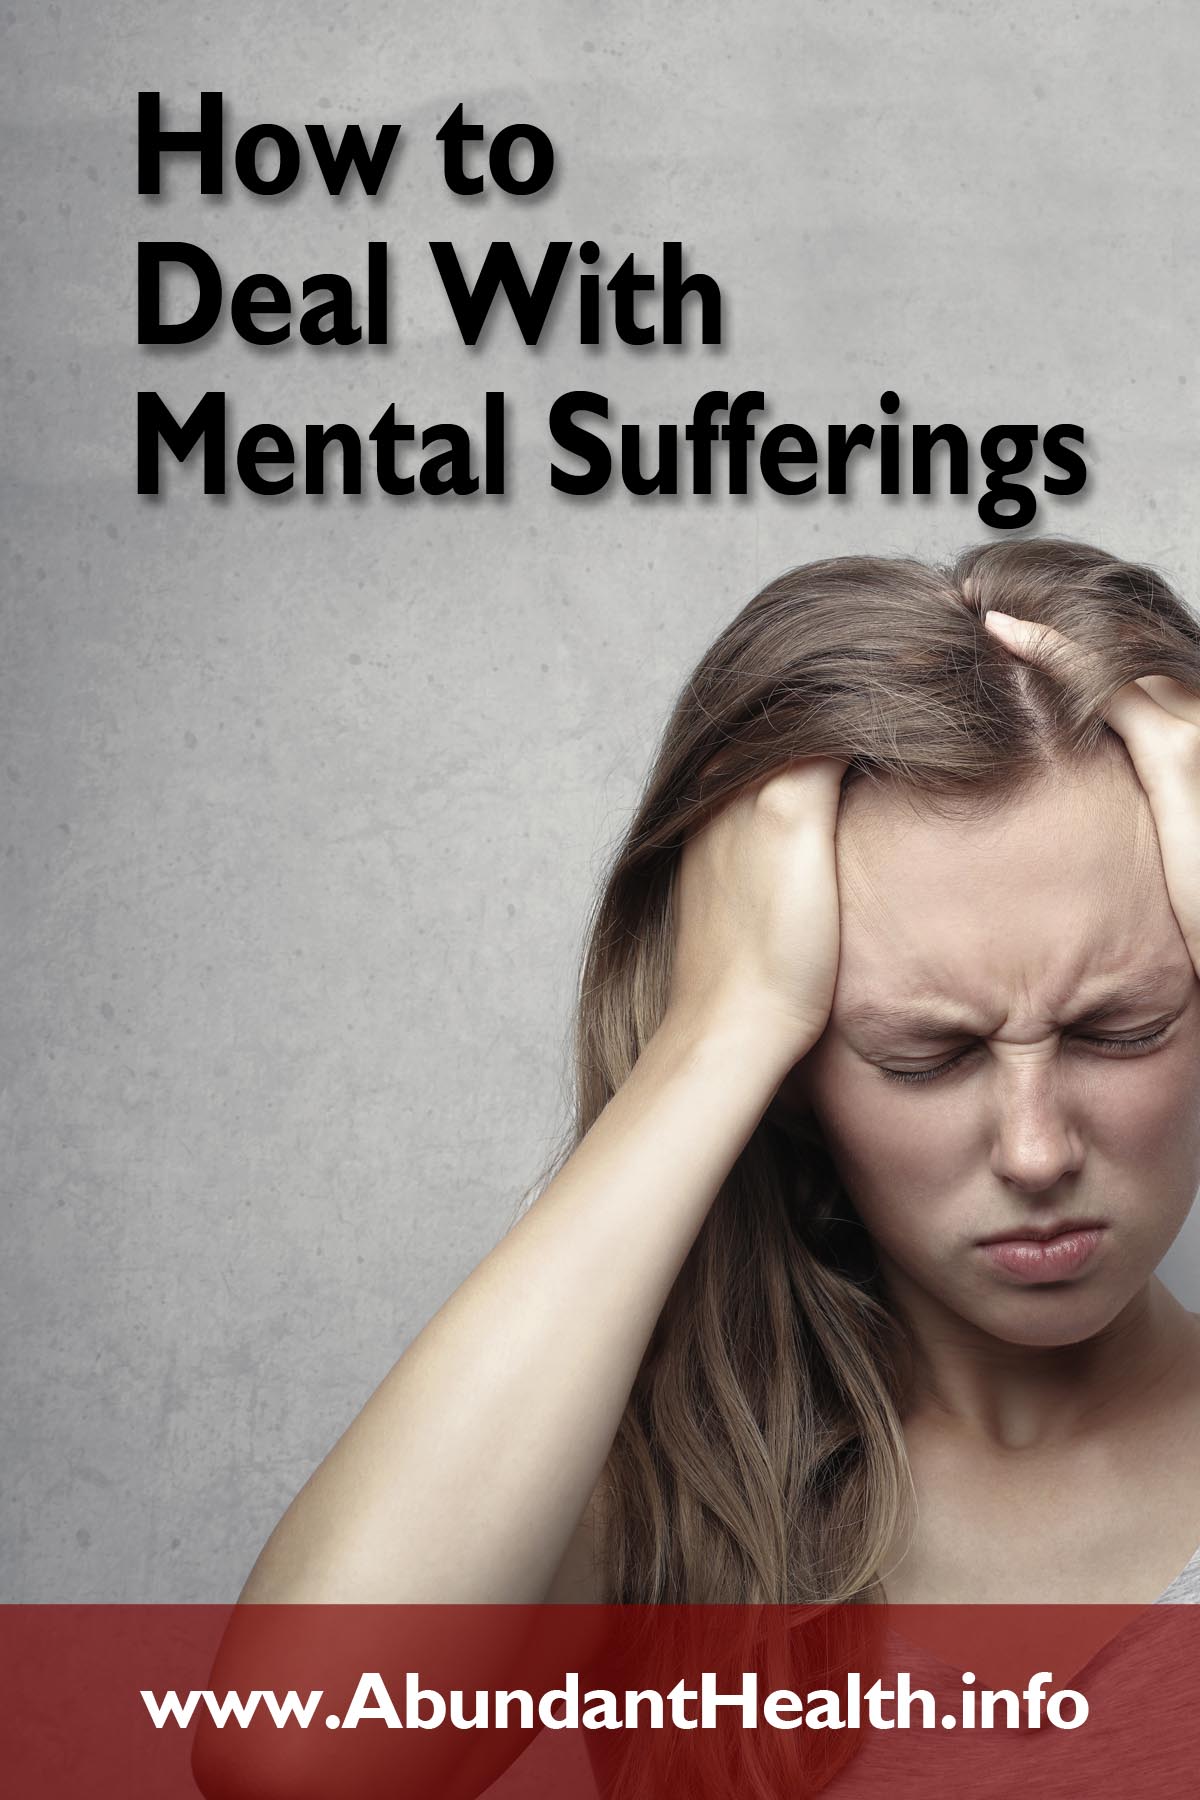 How to Deal With Mental Sufferings